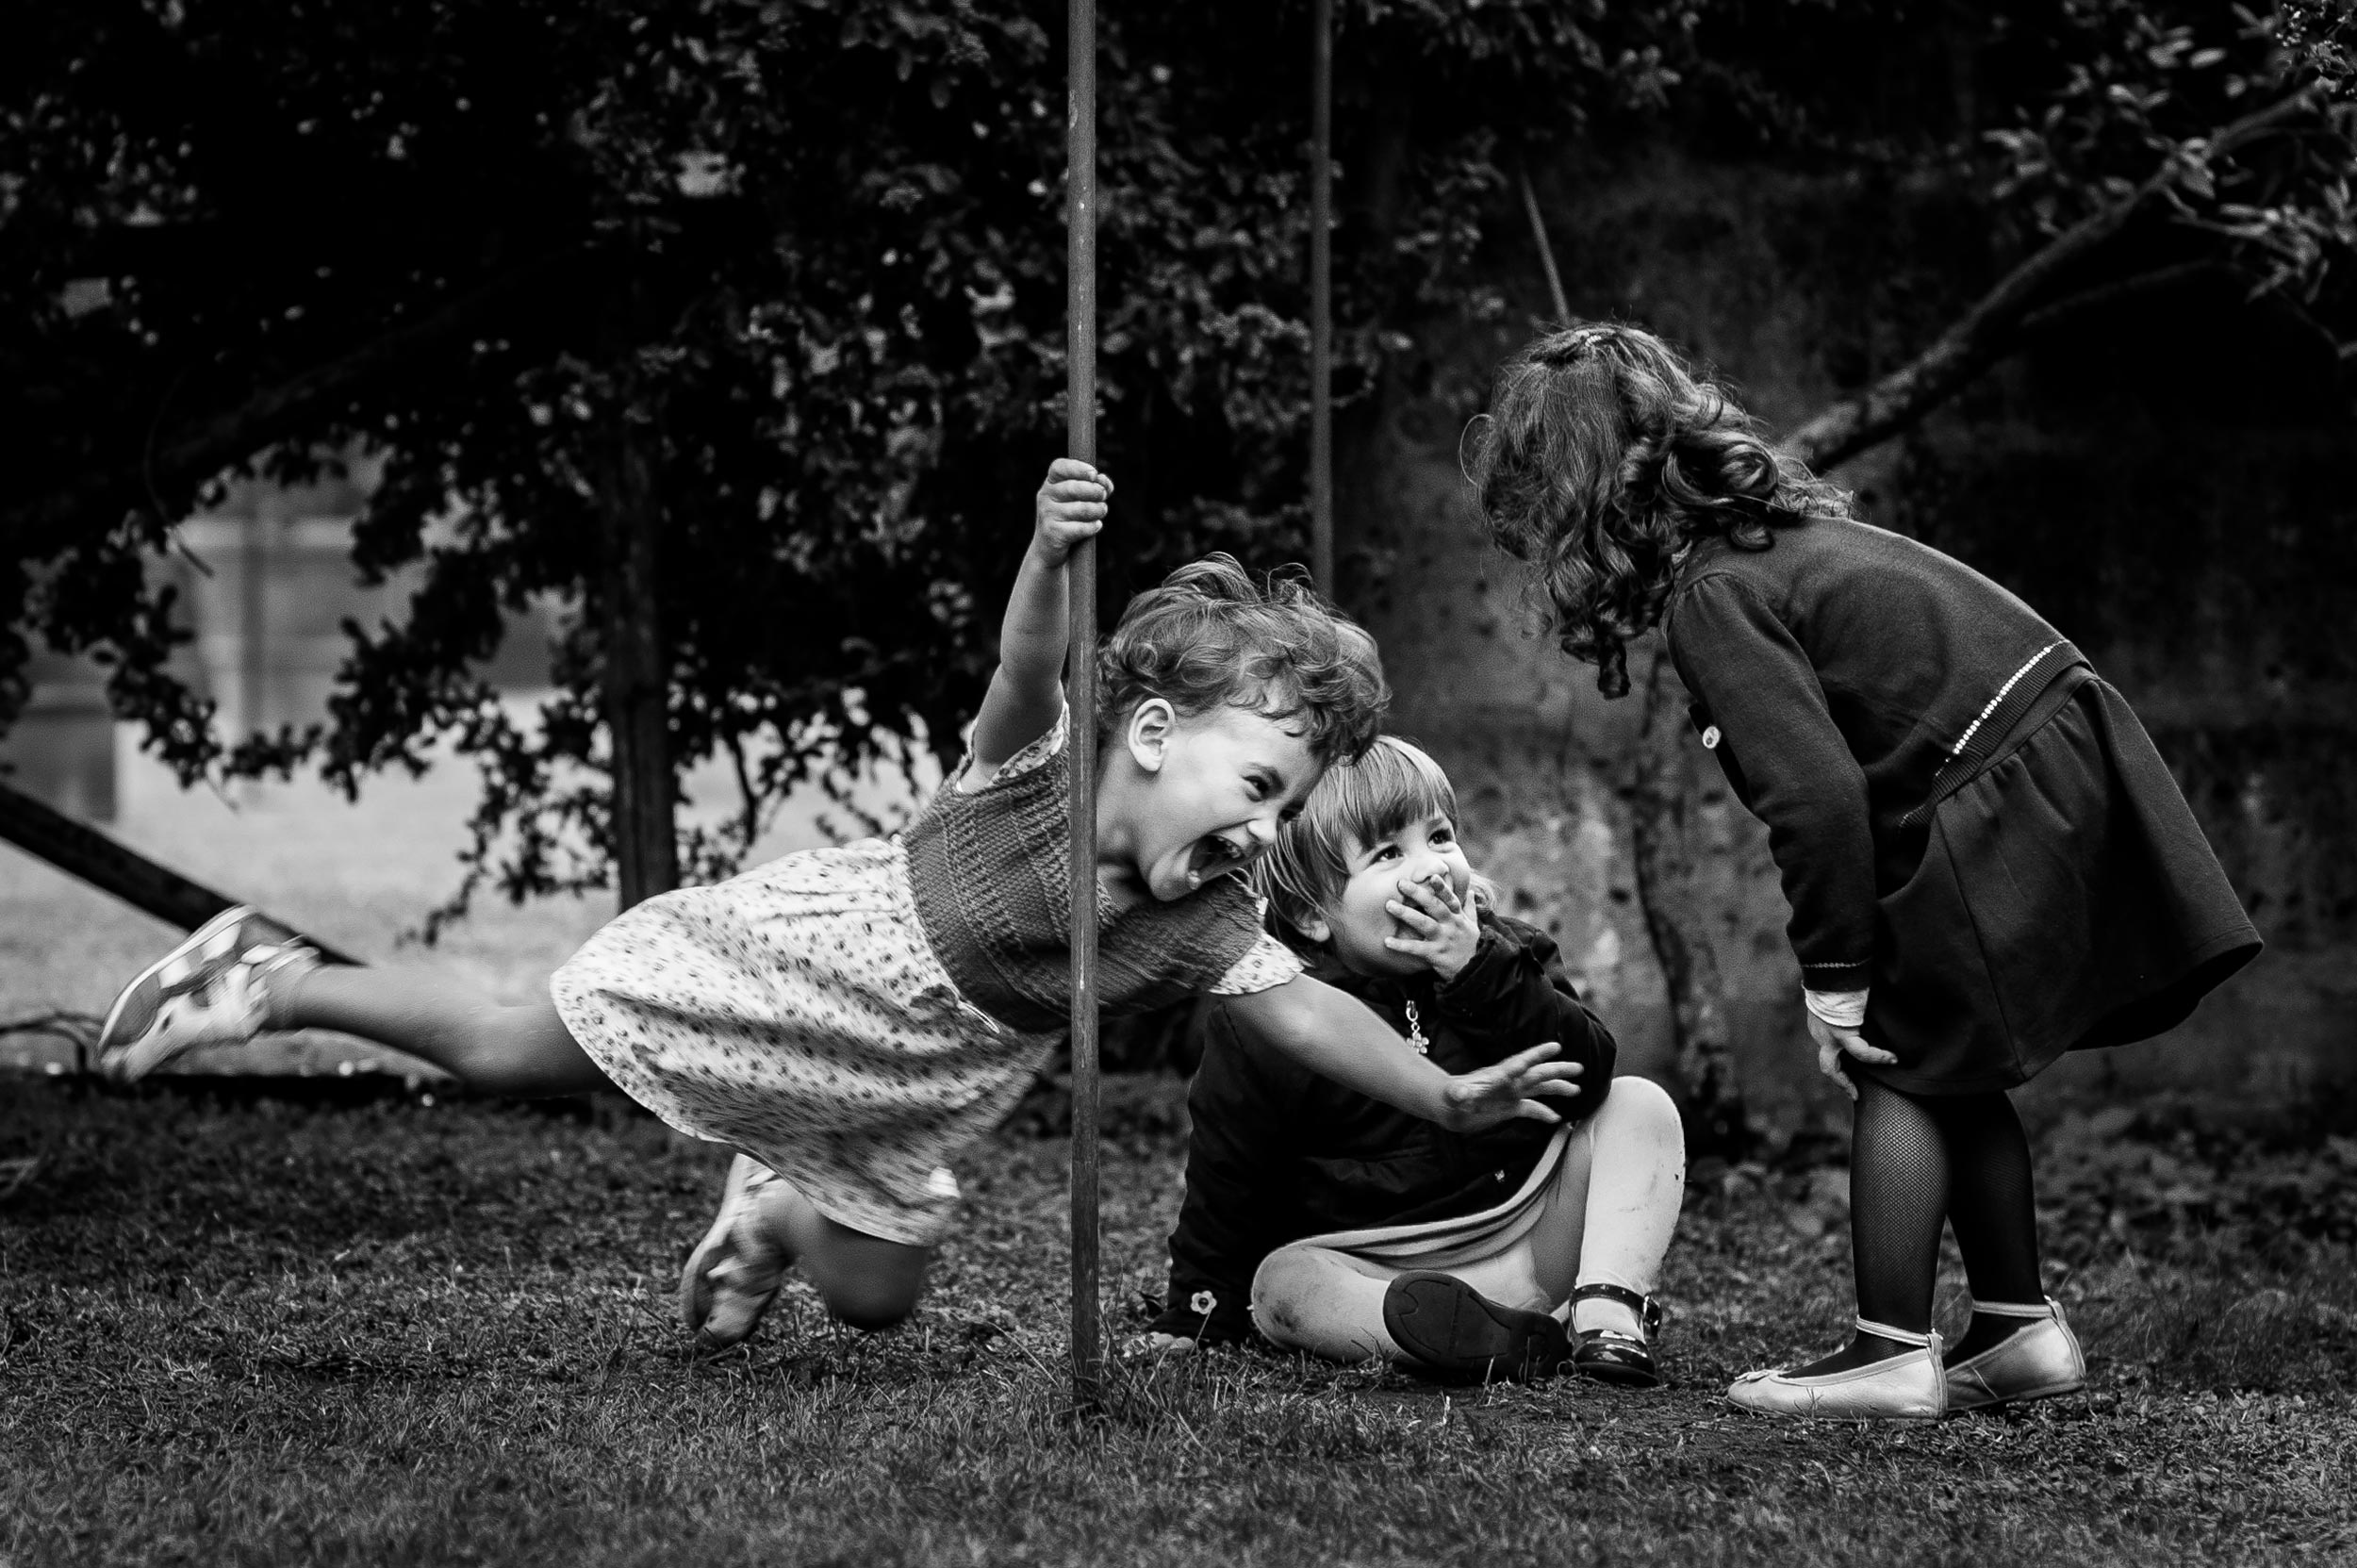 girl-playing-with-a-pole-among-children-black-and-white-wedding-photography.jpg